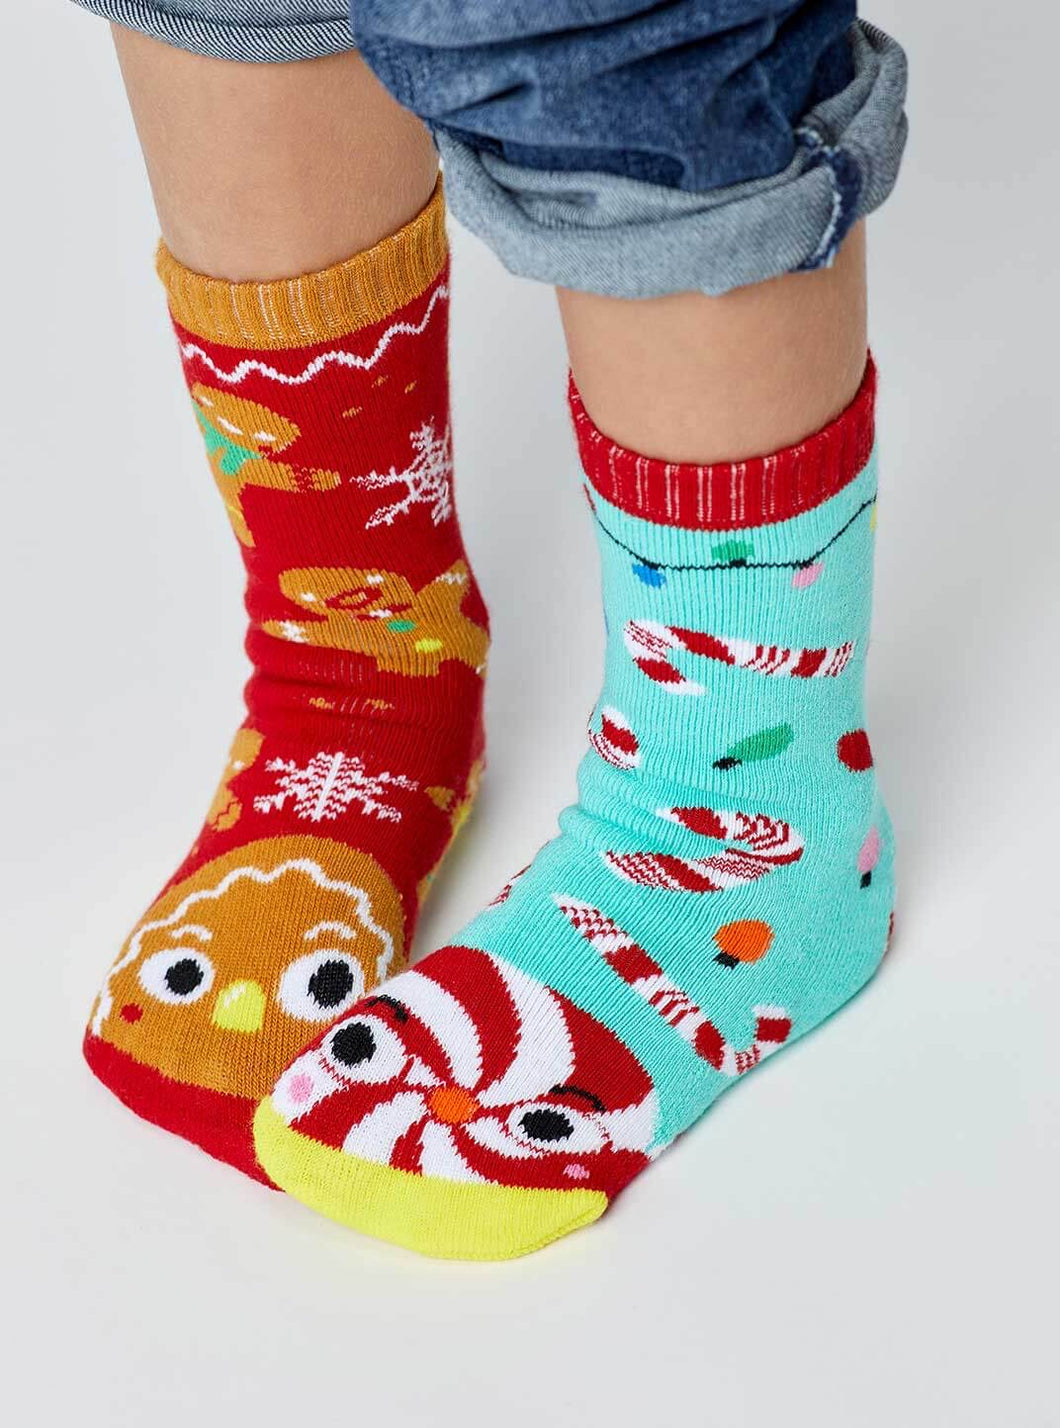 Gingerbread and Candy Cane socks